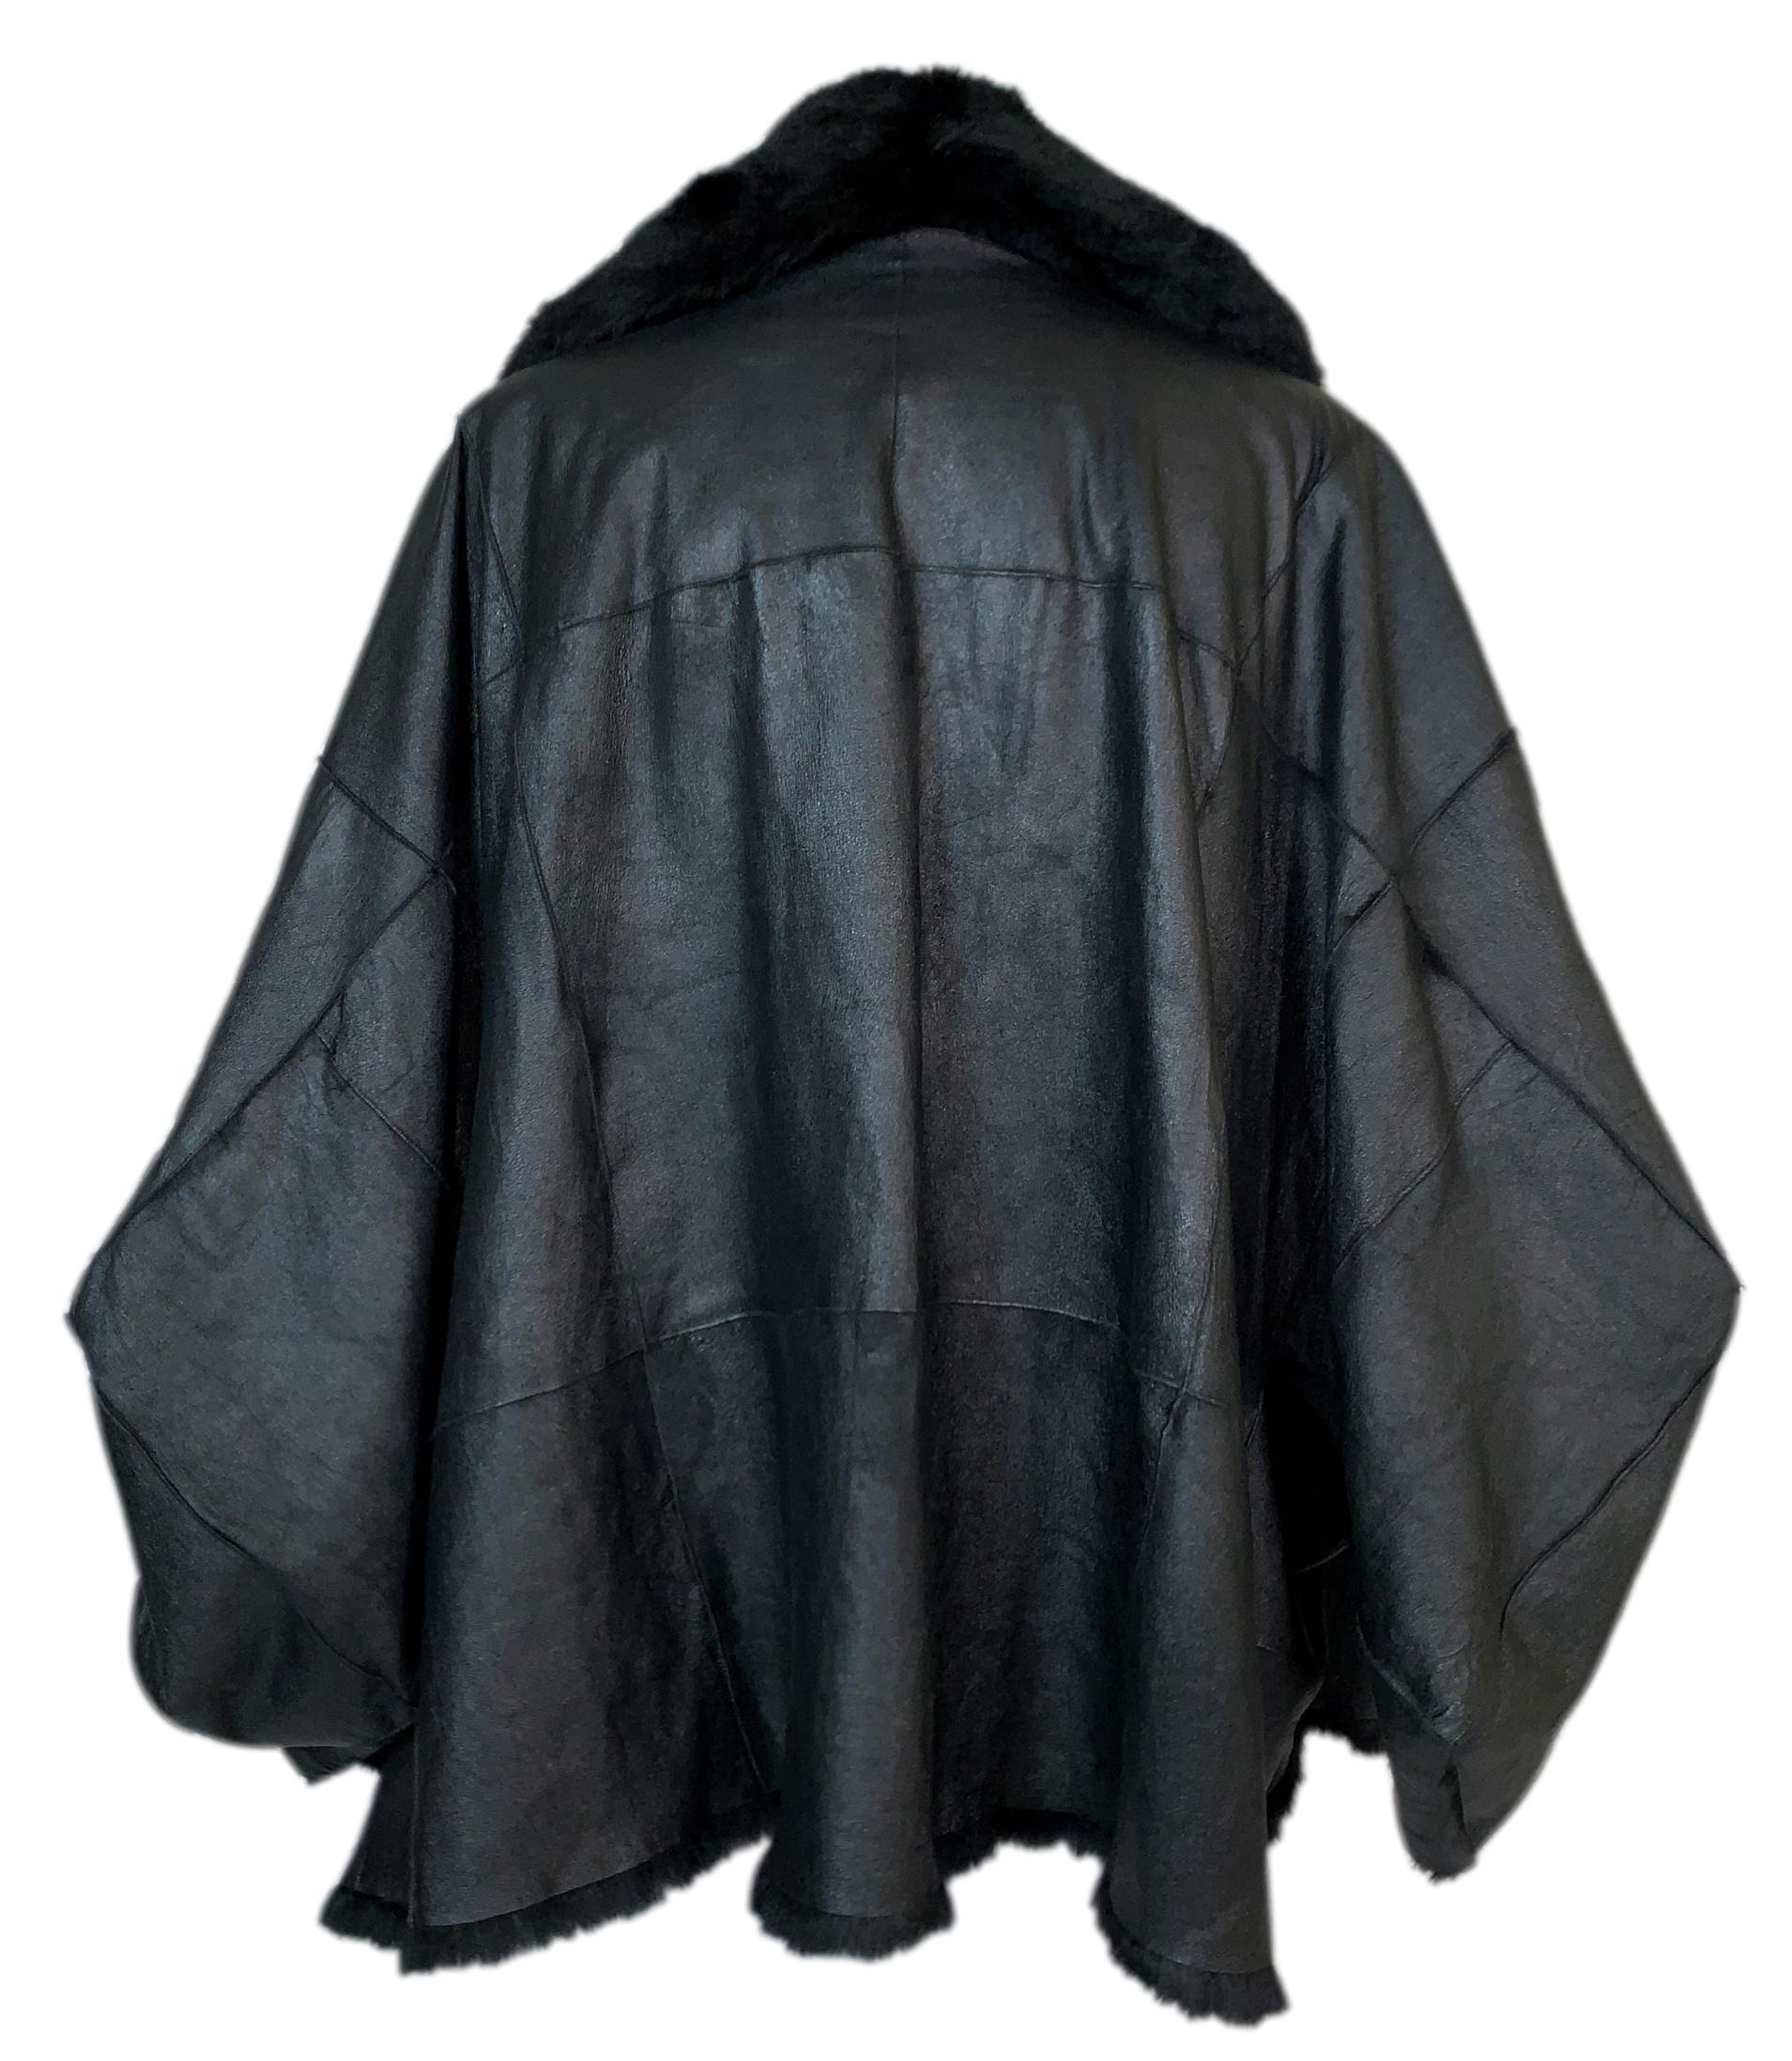 F/W 2003 Christian Dior John Galliano Black Shearling Leather Coat Jacket In Good Condition For Sale In Yukon, OK